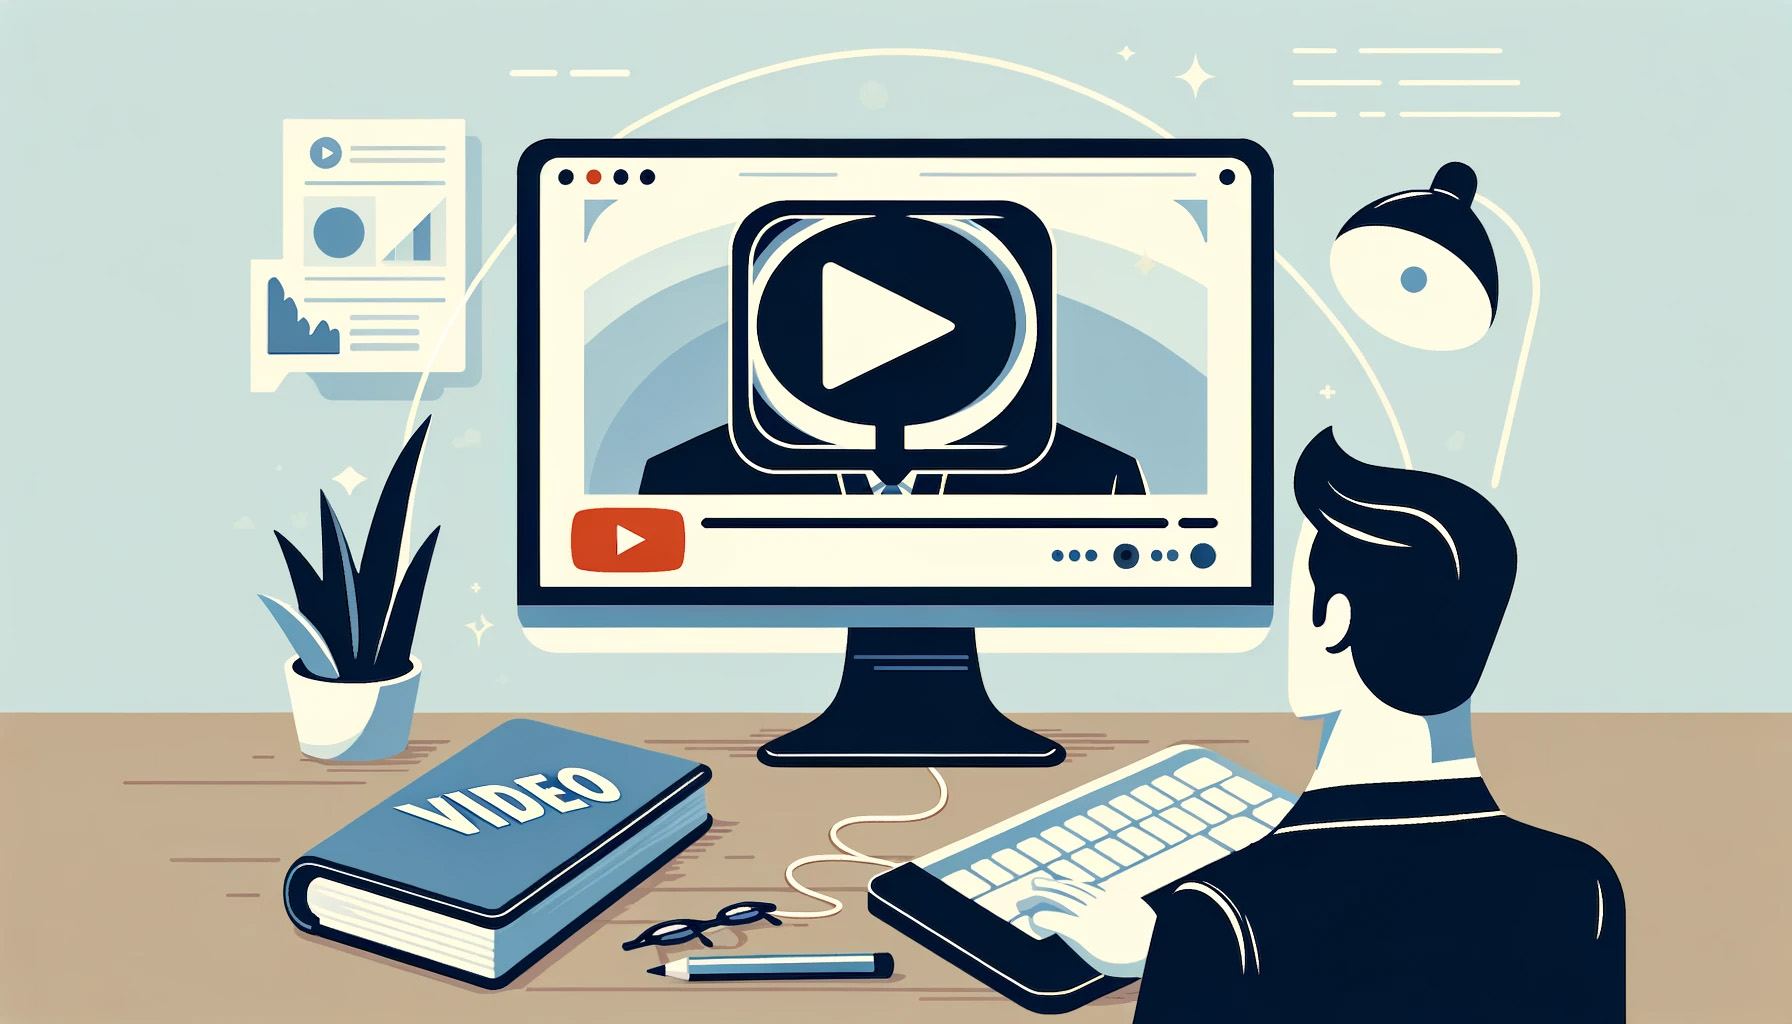 video player on computer screen, businessman sitting in front of keyboard, book "Video", YouTube logo